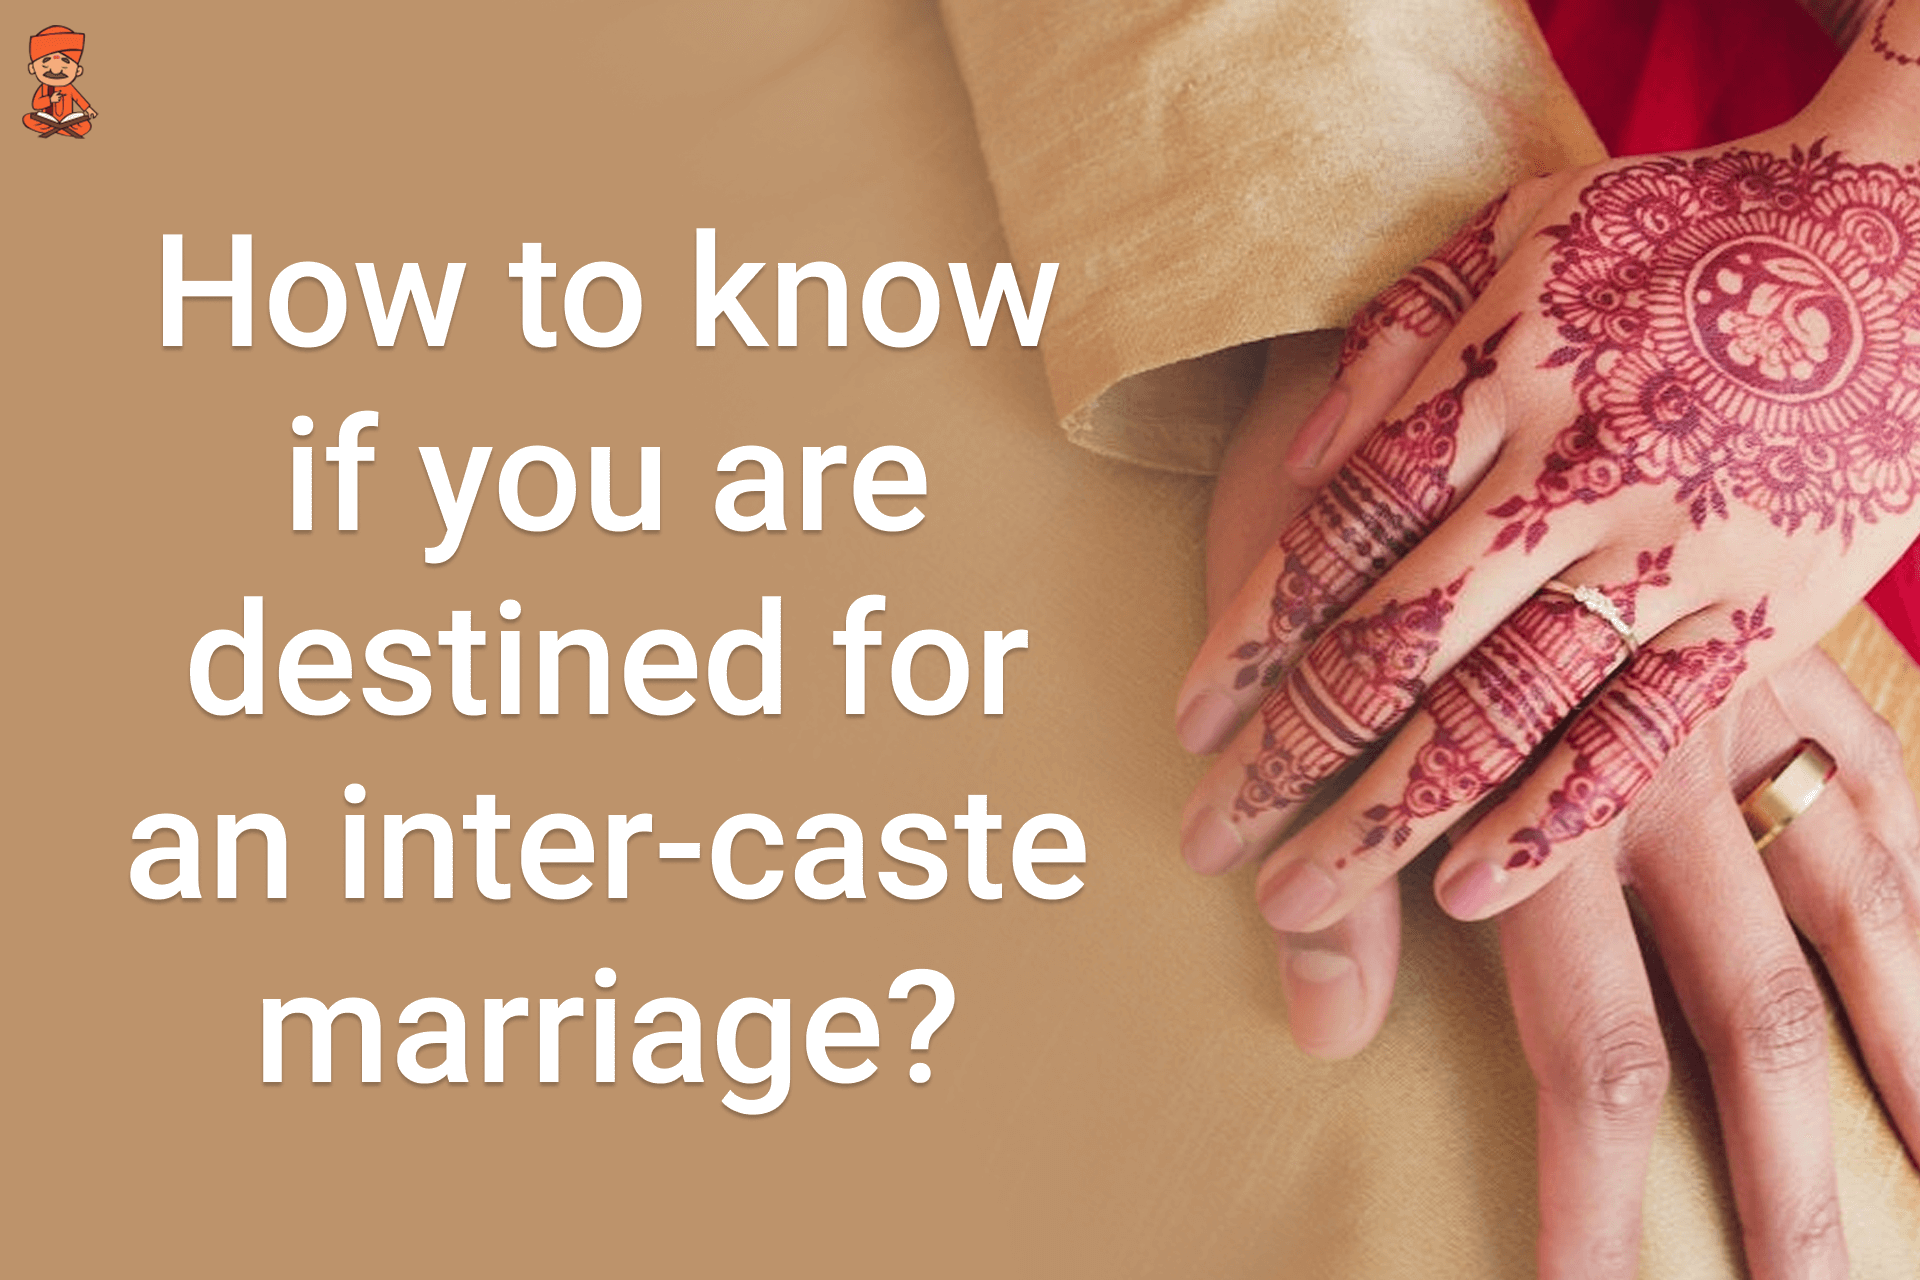 How To Know If You Are Destined For An Inter-caste Marriage?